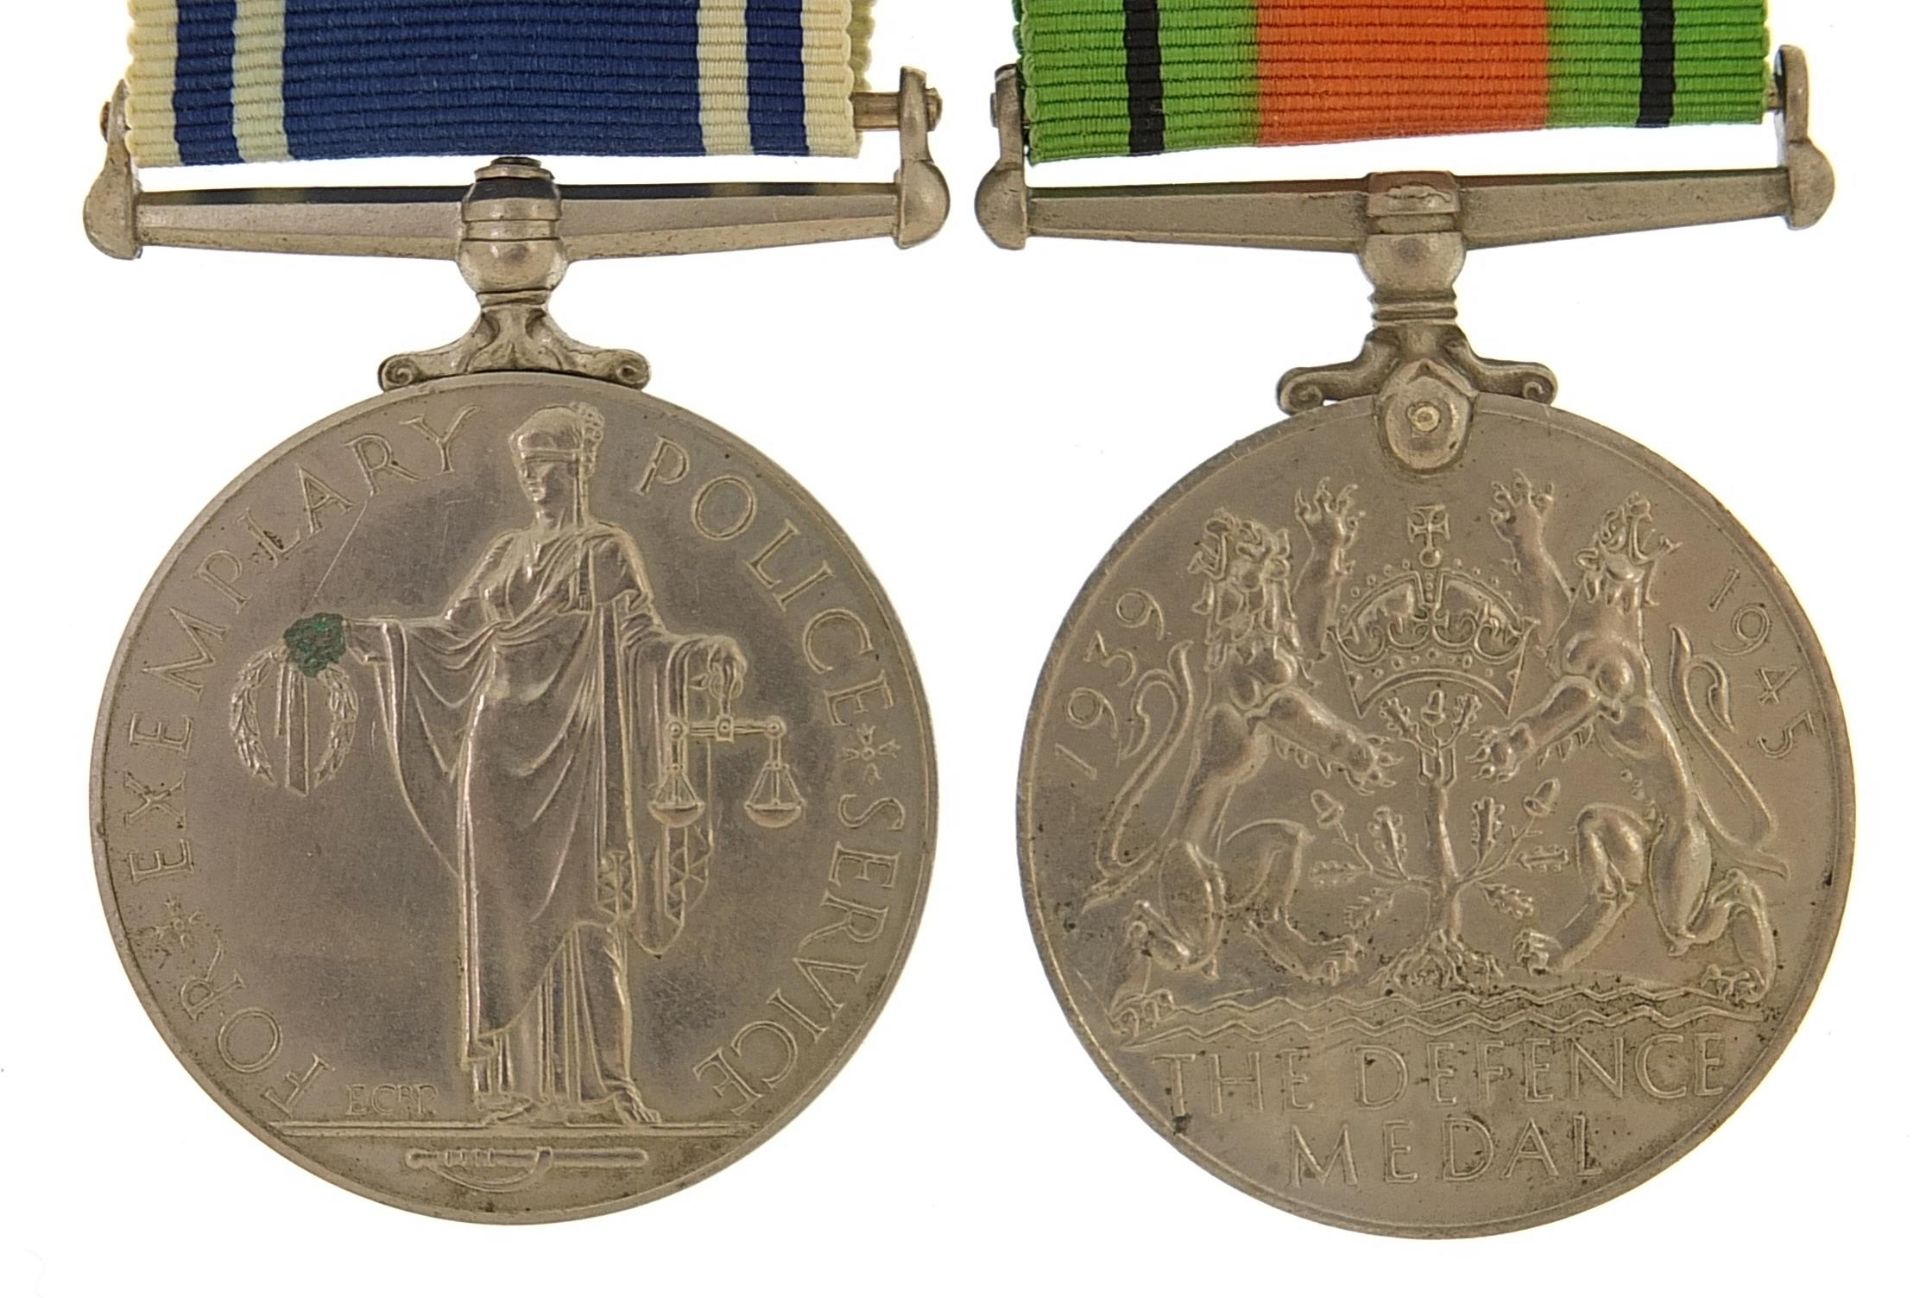 British military World War II Police two medal group including Exemplary Police Service medal